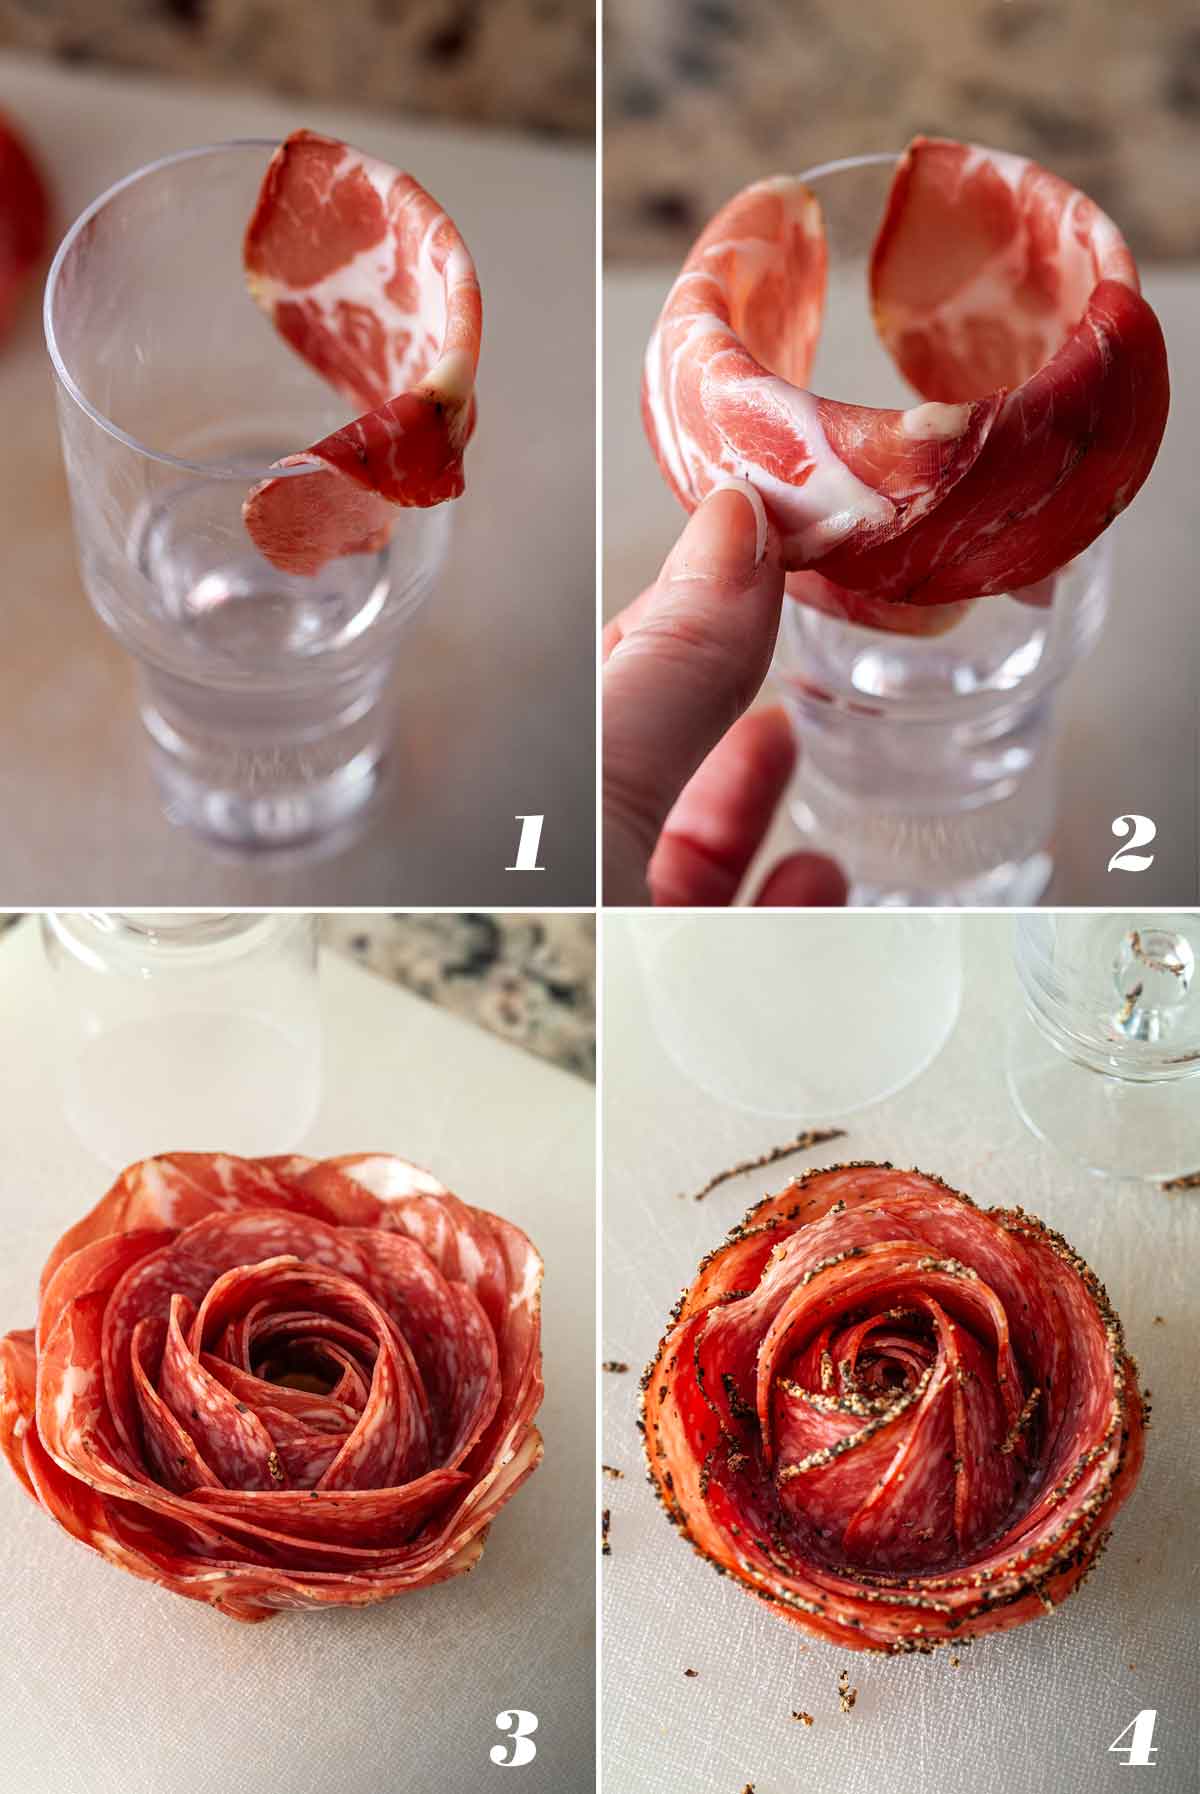 4 numbered images showing how to make different kinds of meat roses.